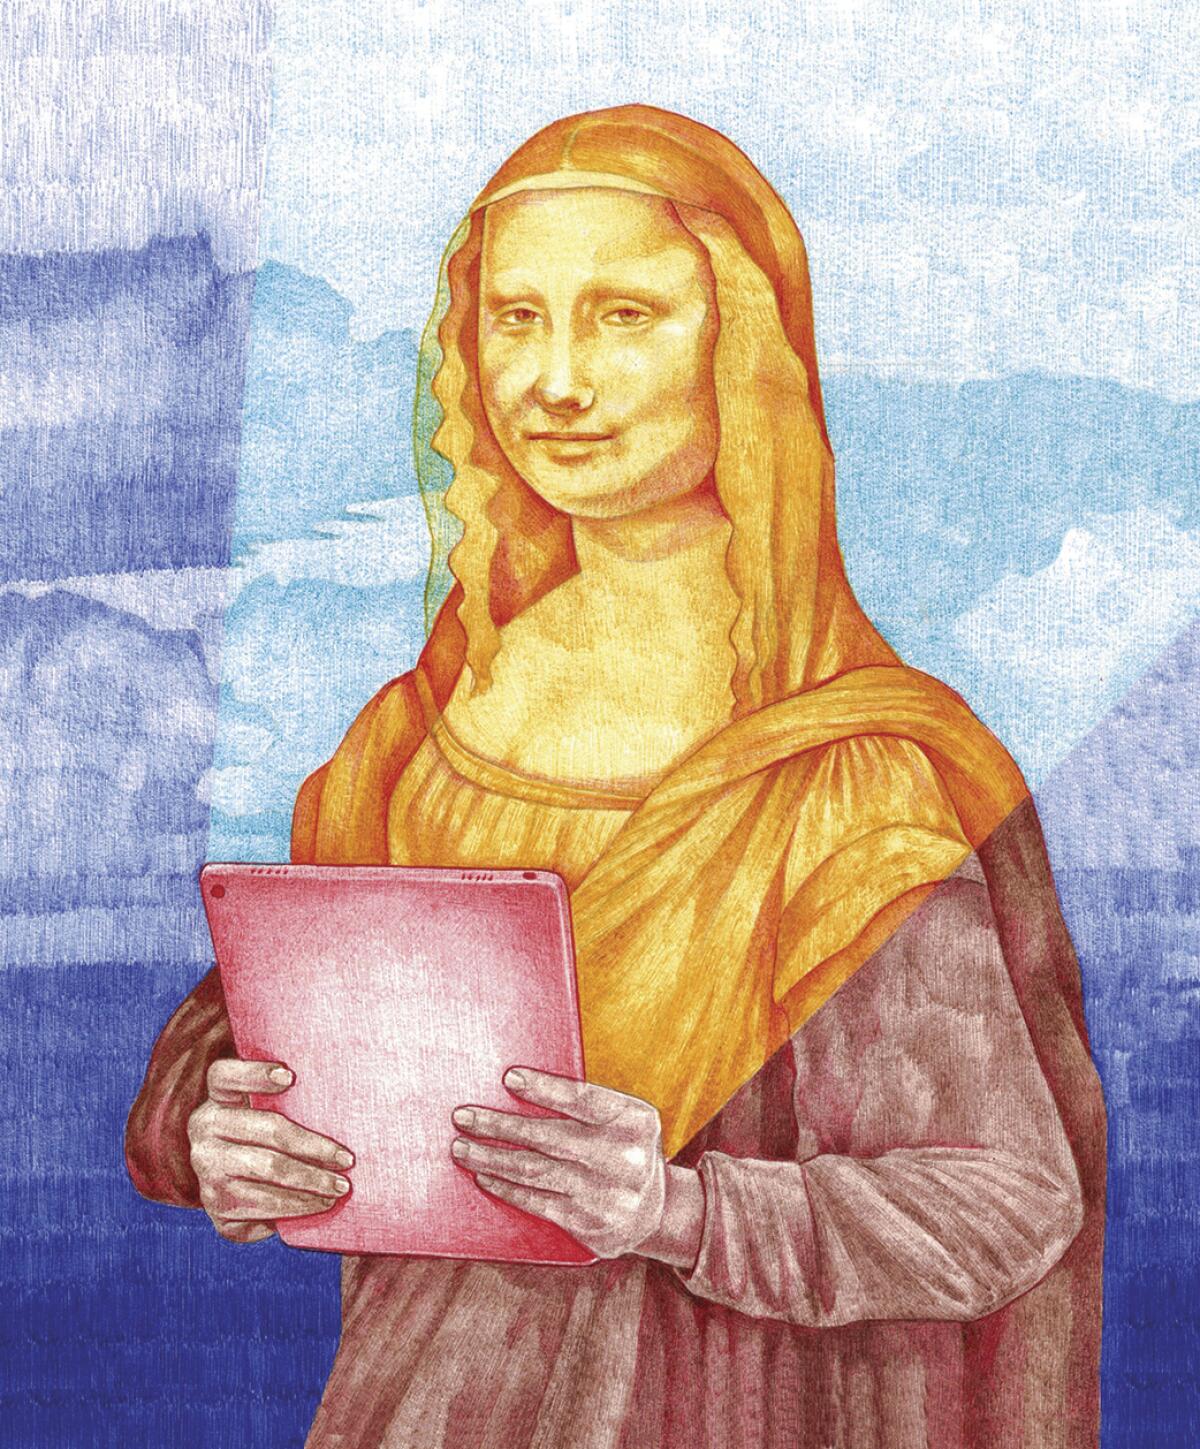 An illustration of the Mona Lisa watching a show on a tablet. But is she laughing or sad?